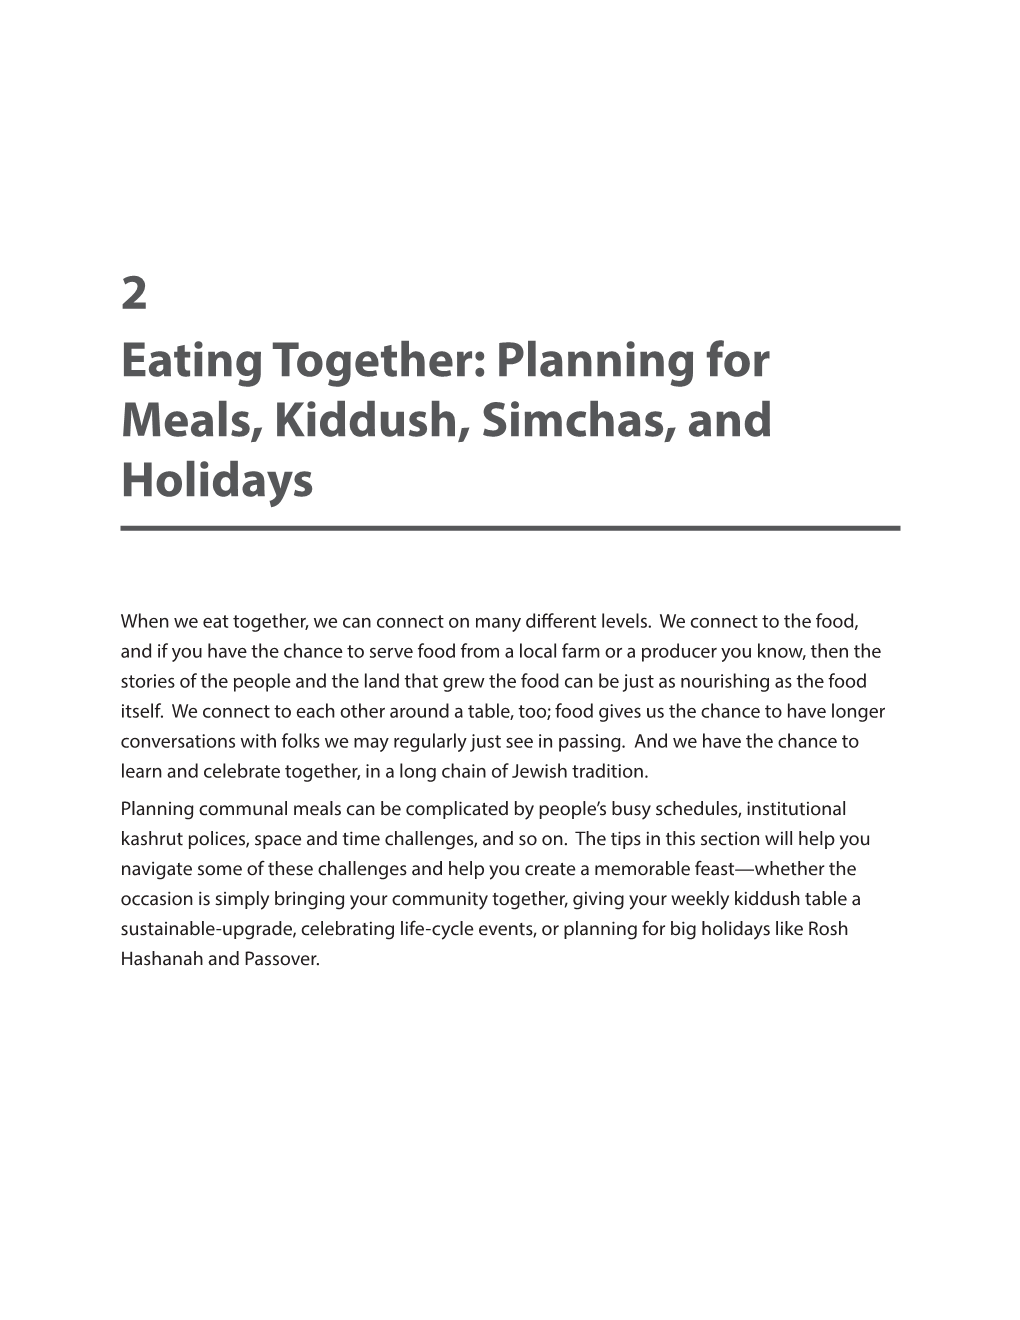 Planning for Meals, Kiddush, Simchas, and Holidays